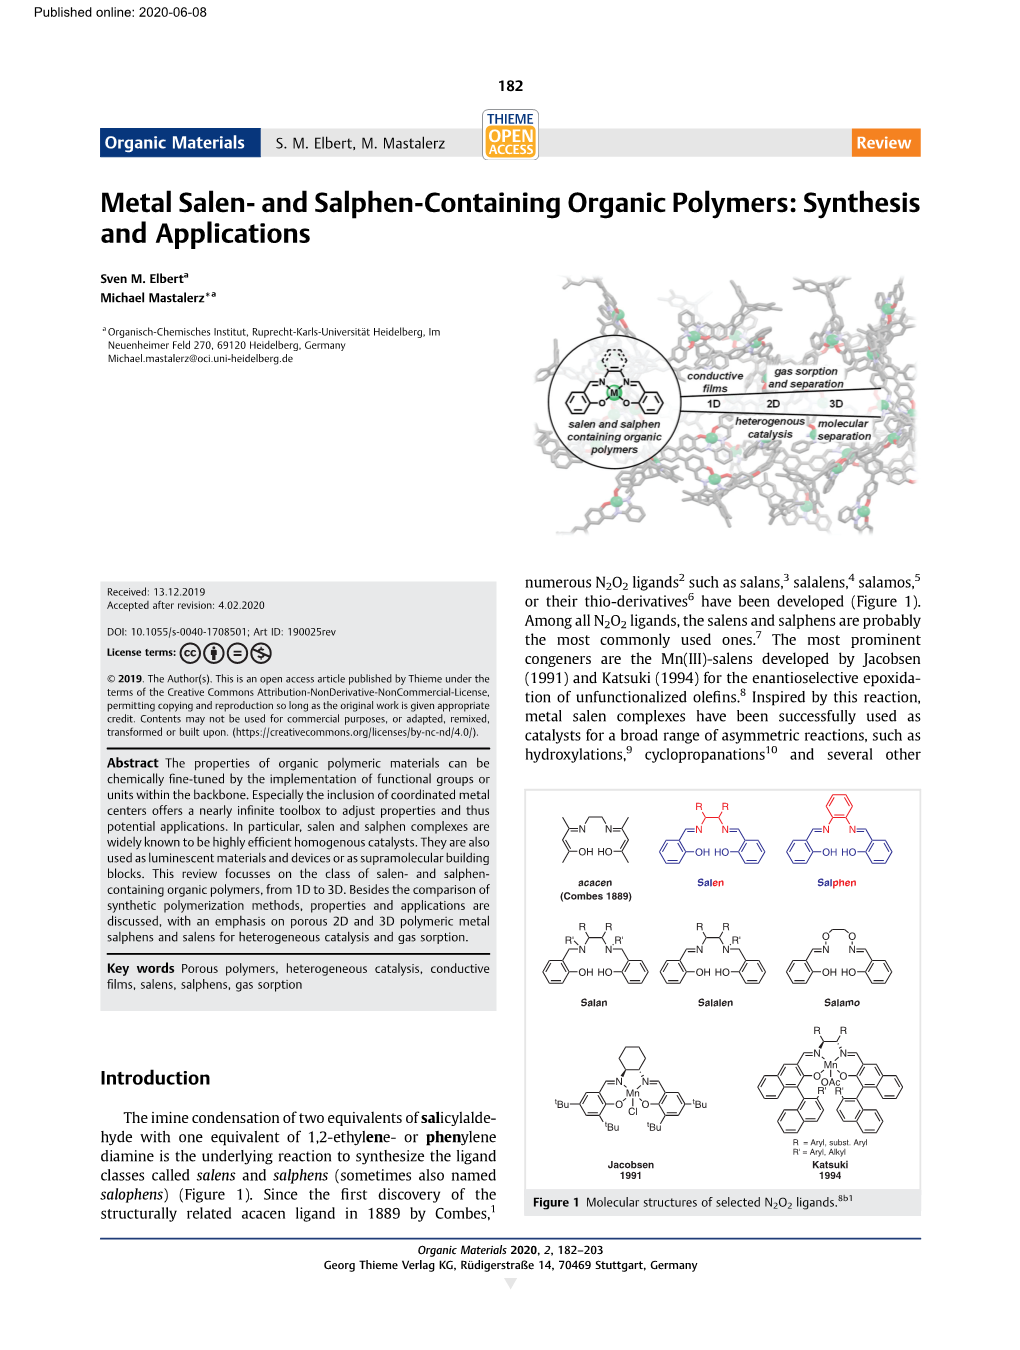 Metal Salen- and Salphen-Containing Organic Polymers: Synthesis and Applications